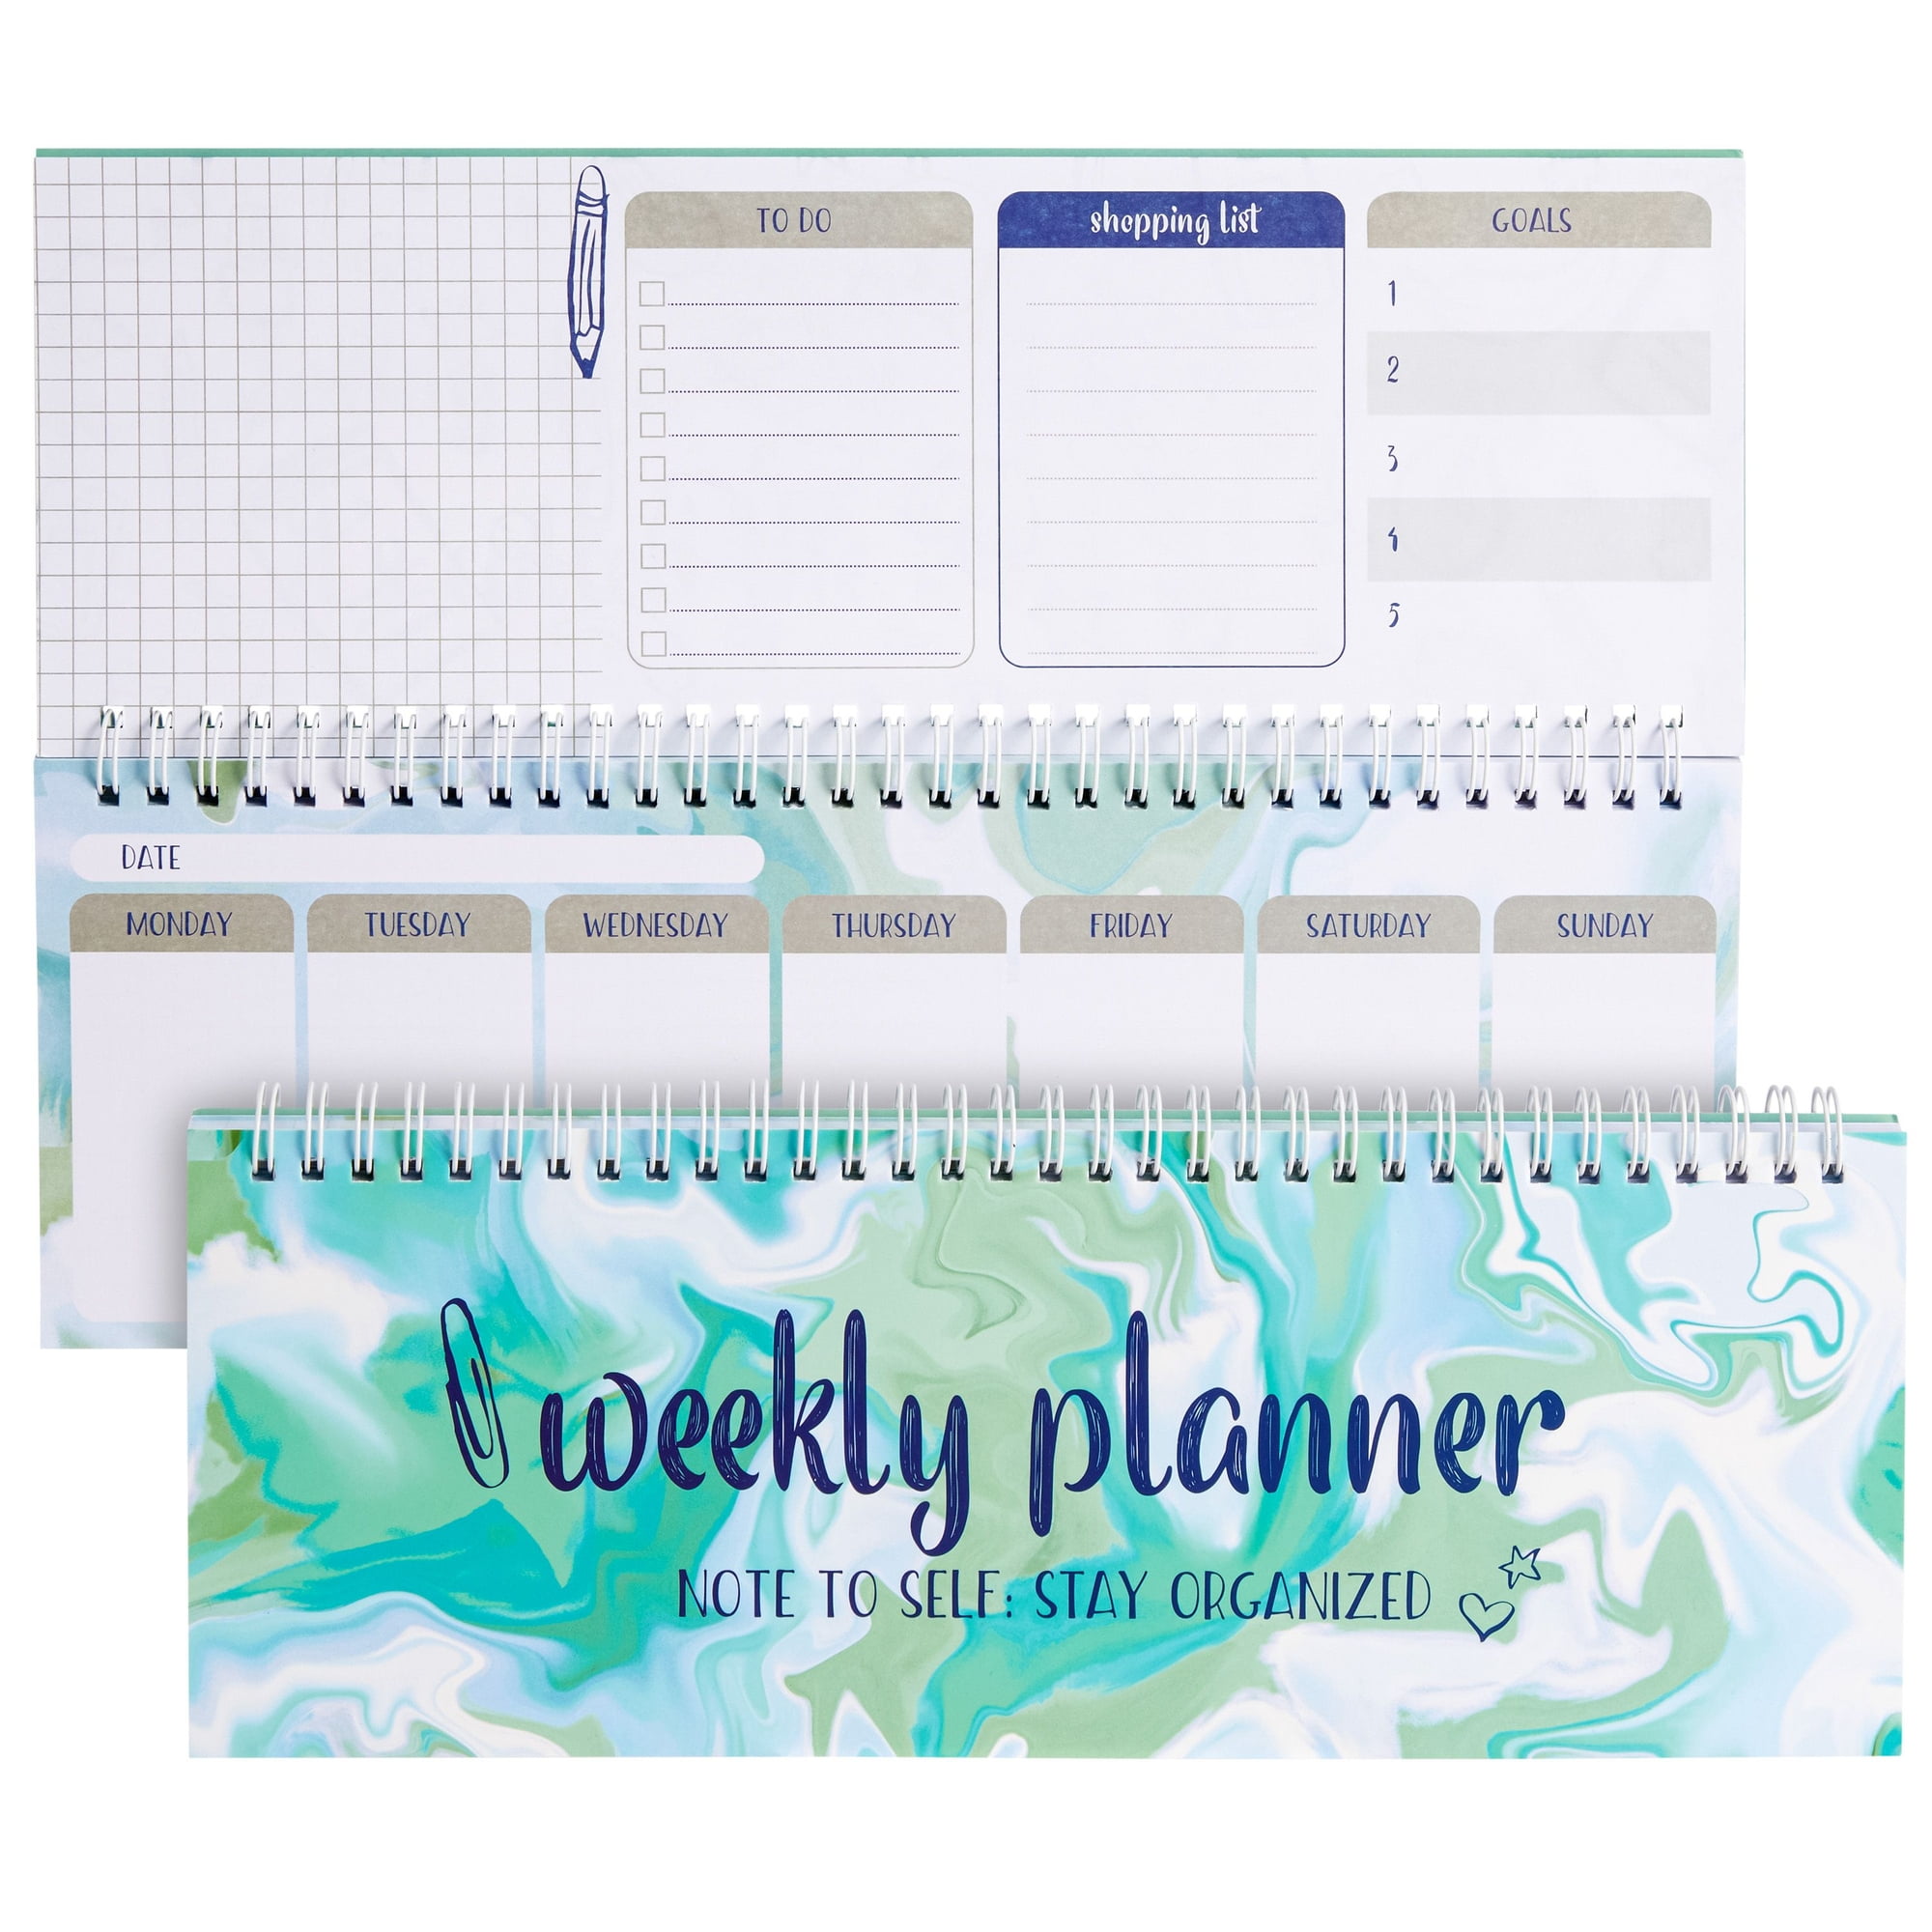 Undated Weekly NO.07 Vertical Border Lined Planner Insert